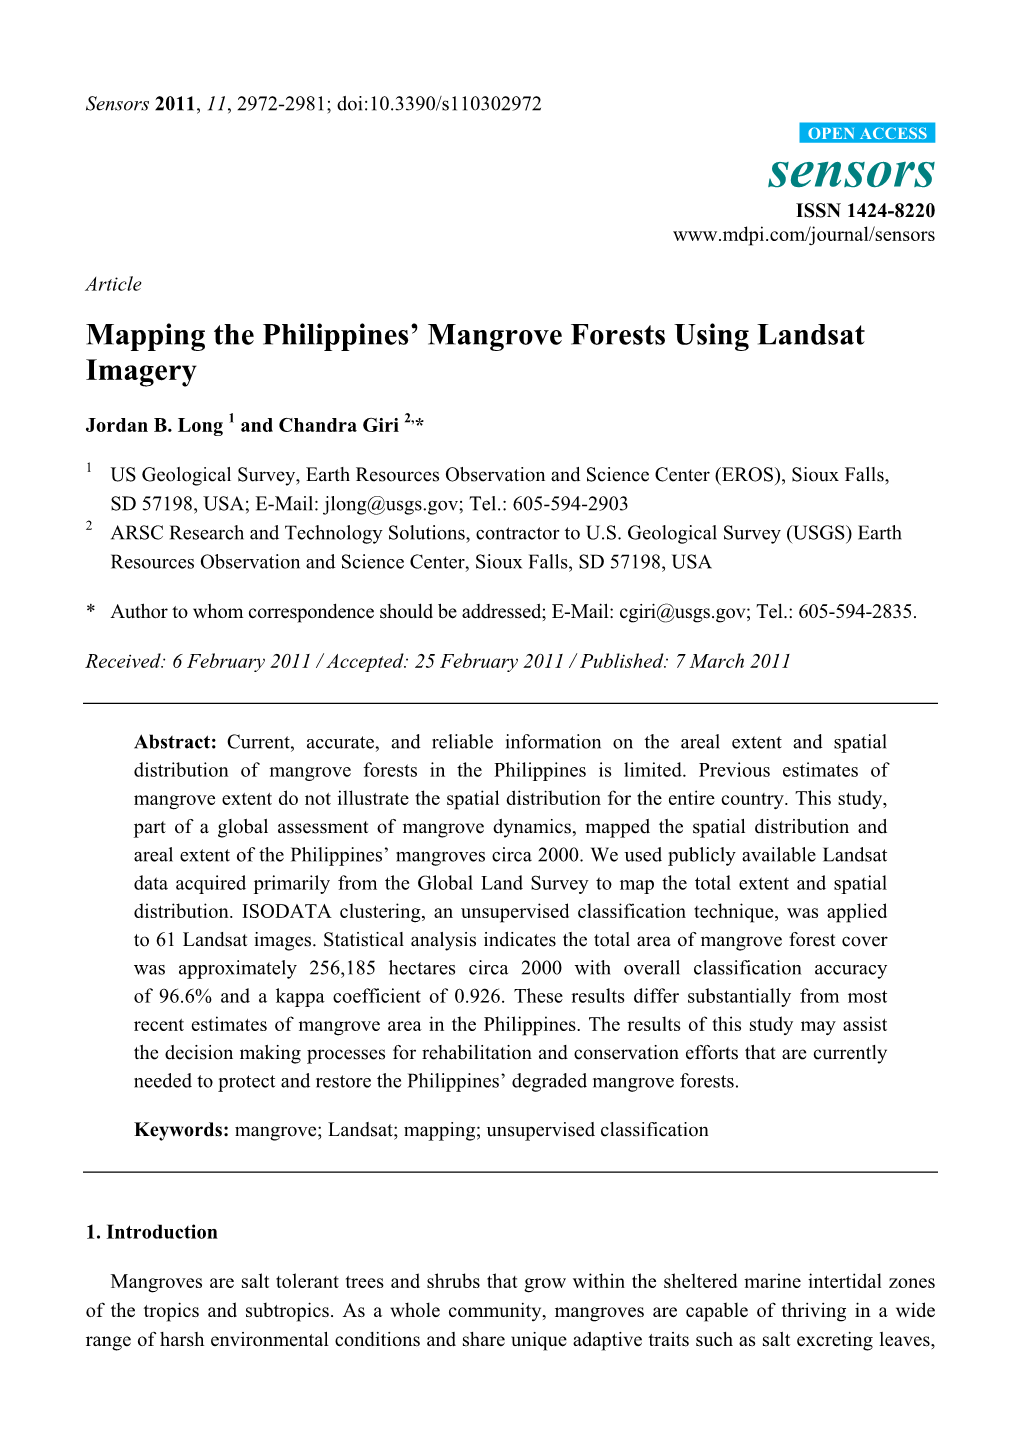 Mapping the Philippines' Mangrove Forests Using Landsat Imagery